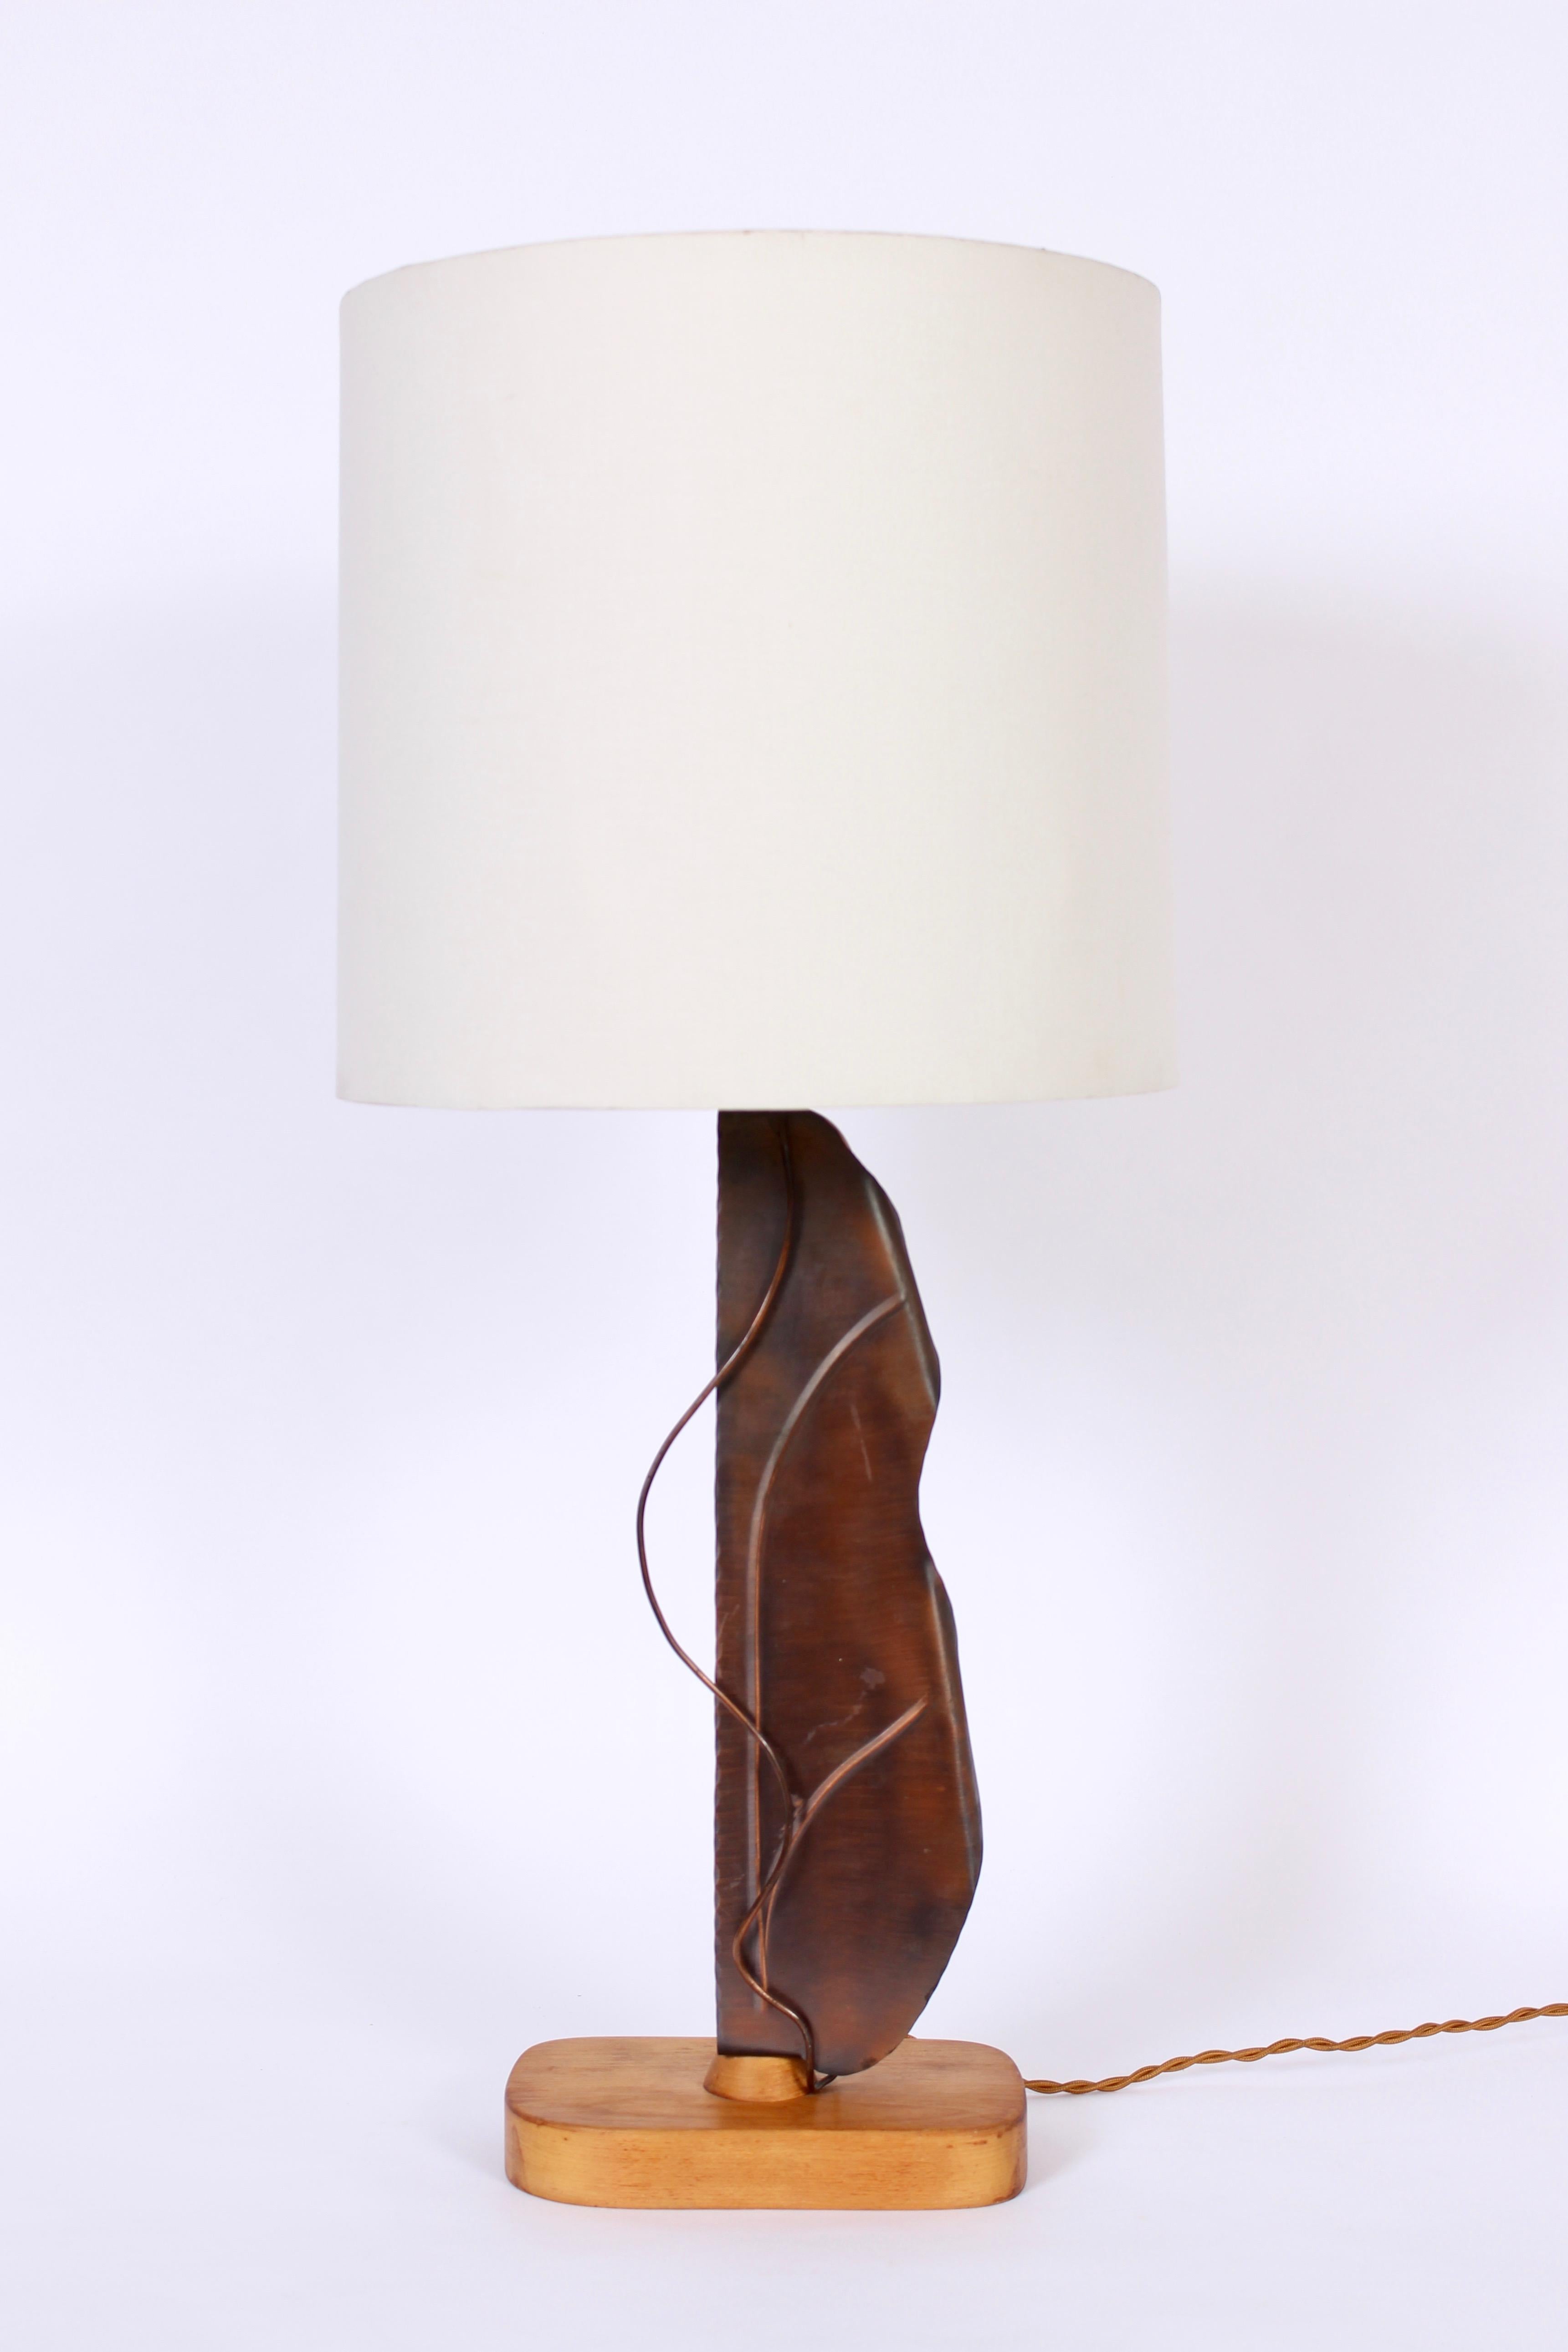 Tall Yasha Heifetz Abstract Copper & Bleached Mahogany Table Lamp, circa 1950 For Sale 1